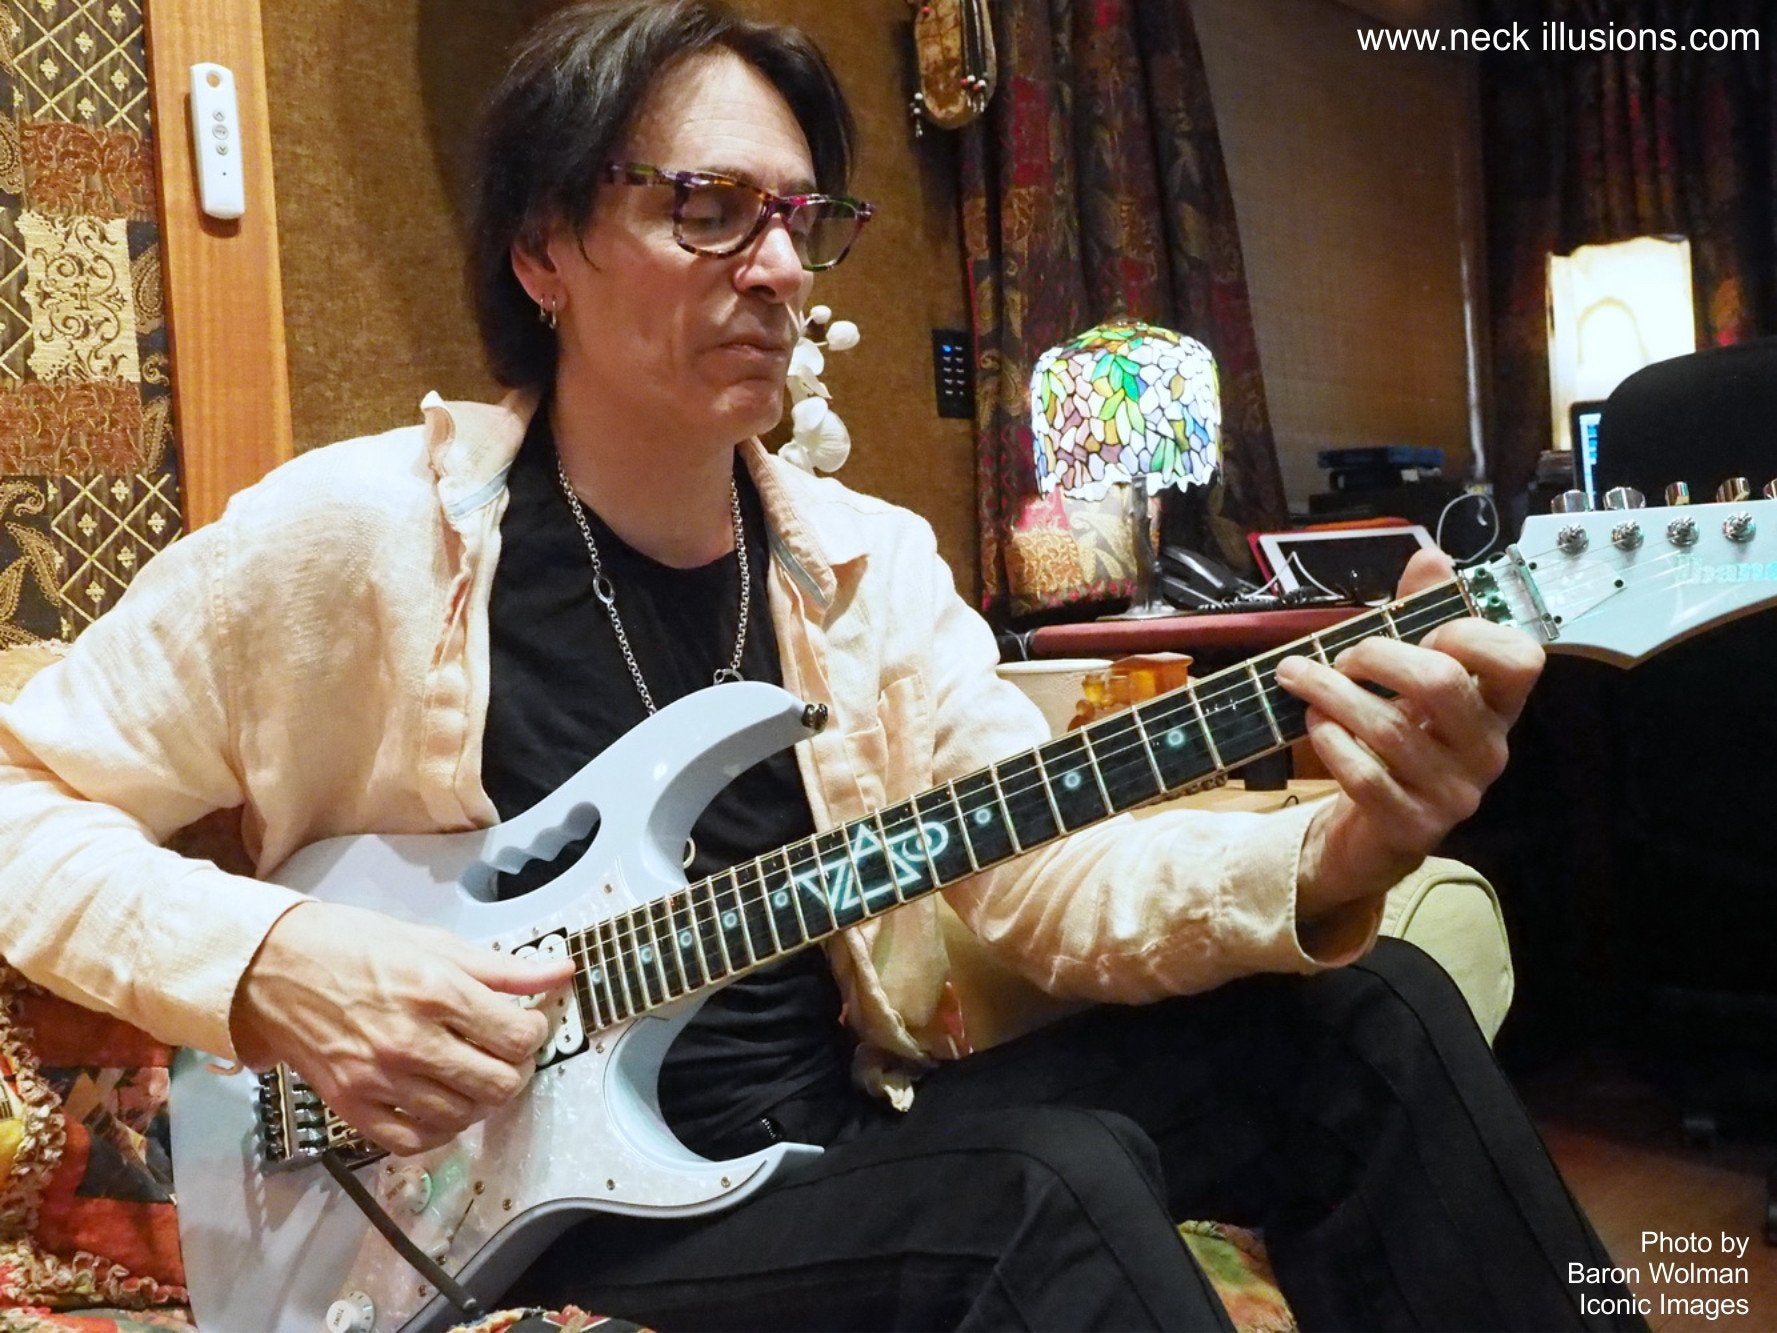 image of steve vai sitting in a recording studio playing a white electric guitar with a fret protector. the fret protector is black with dark colored symbols throghout. descending from the center of the fret protector is a glowing light blue and white steve vai logo. The steve vai logo makes the word "vai" with an upside down triangle, a right side up one, and a line going across the triangles with a curl at the end next to the triangle that is upright.